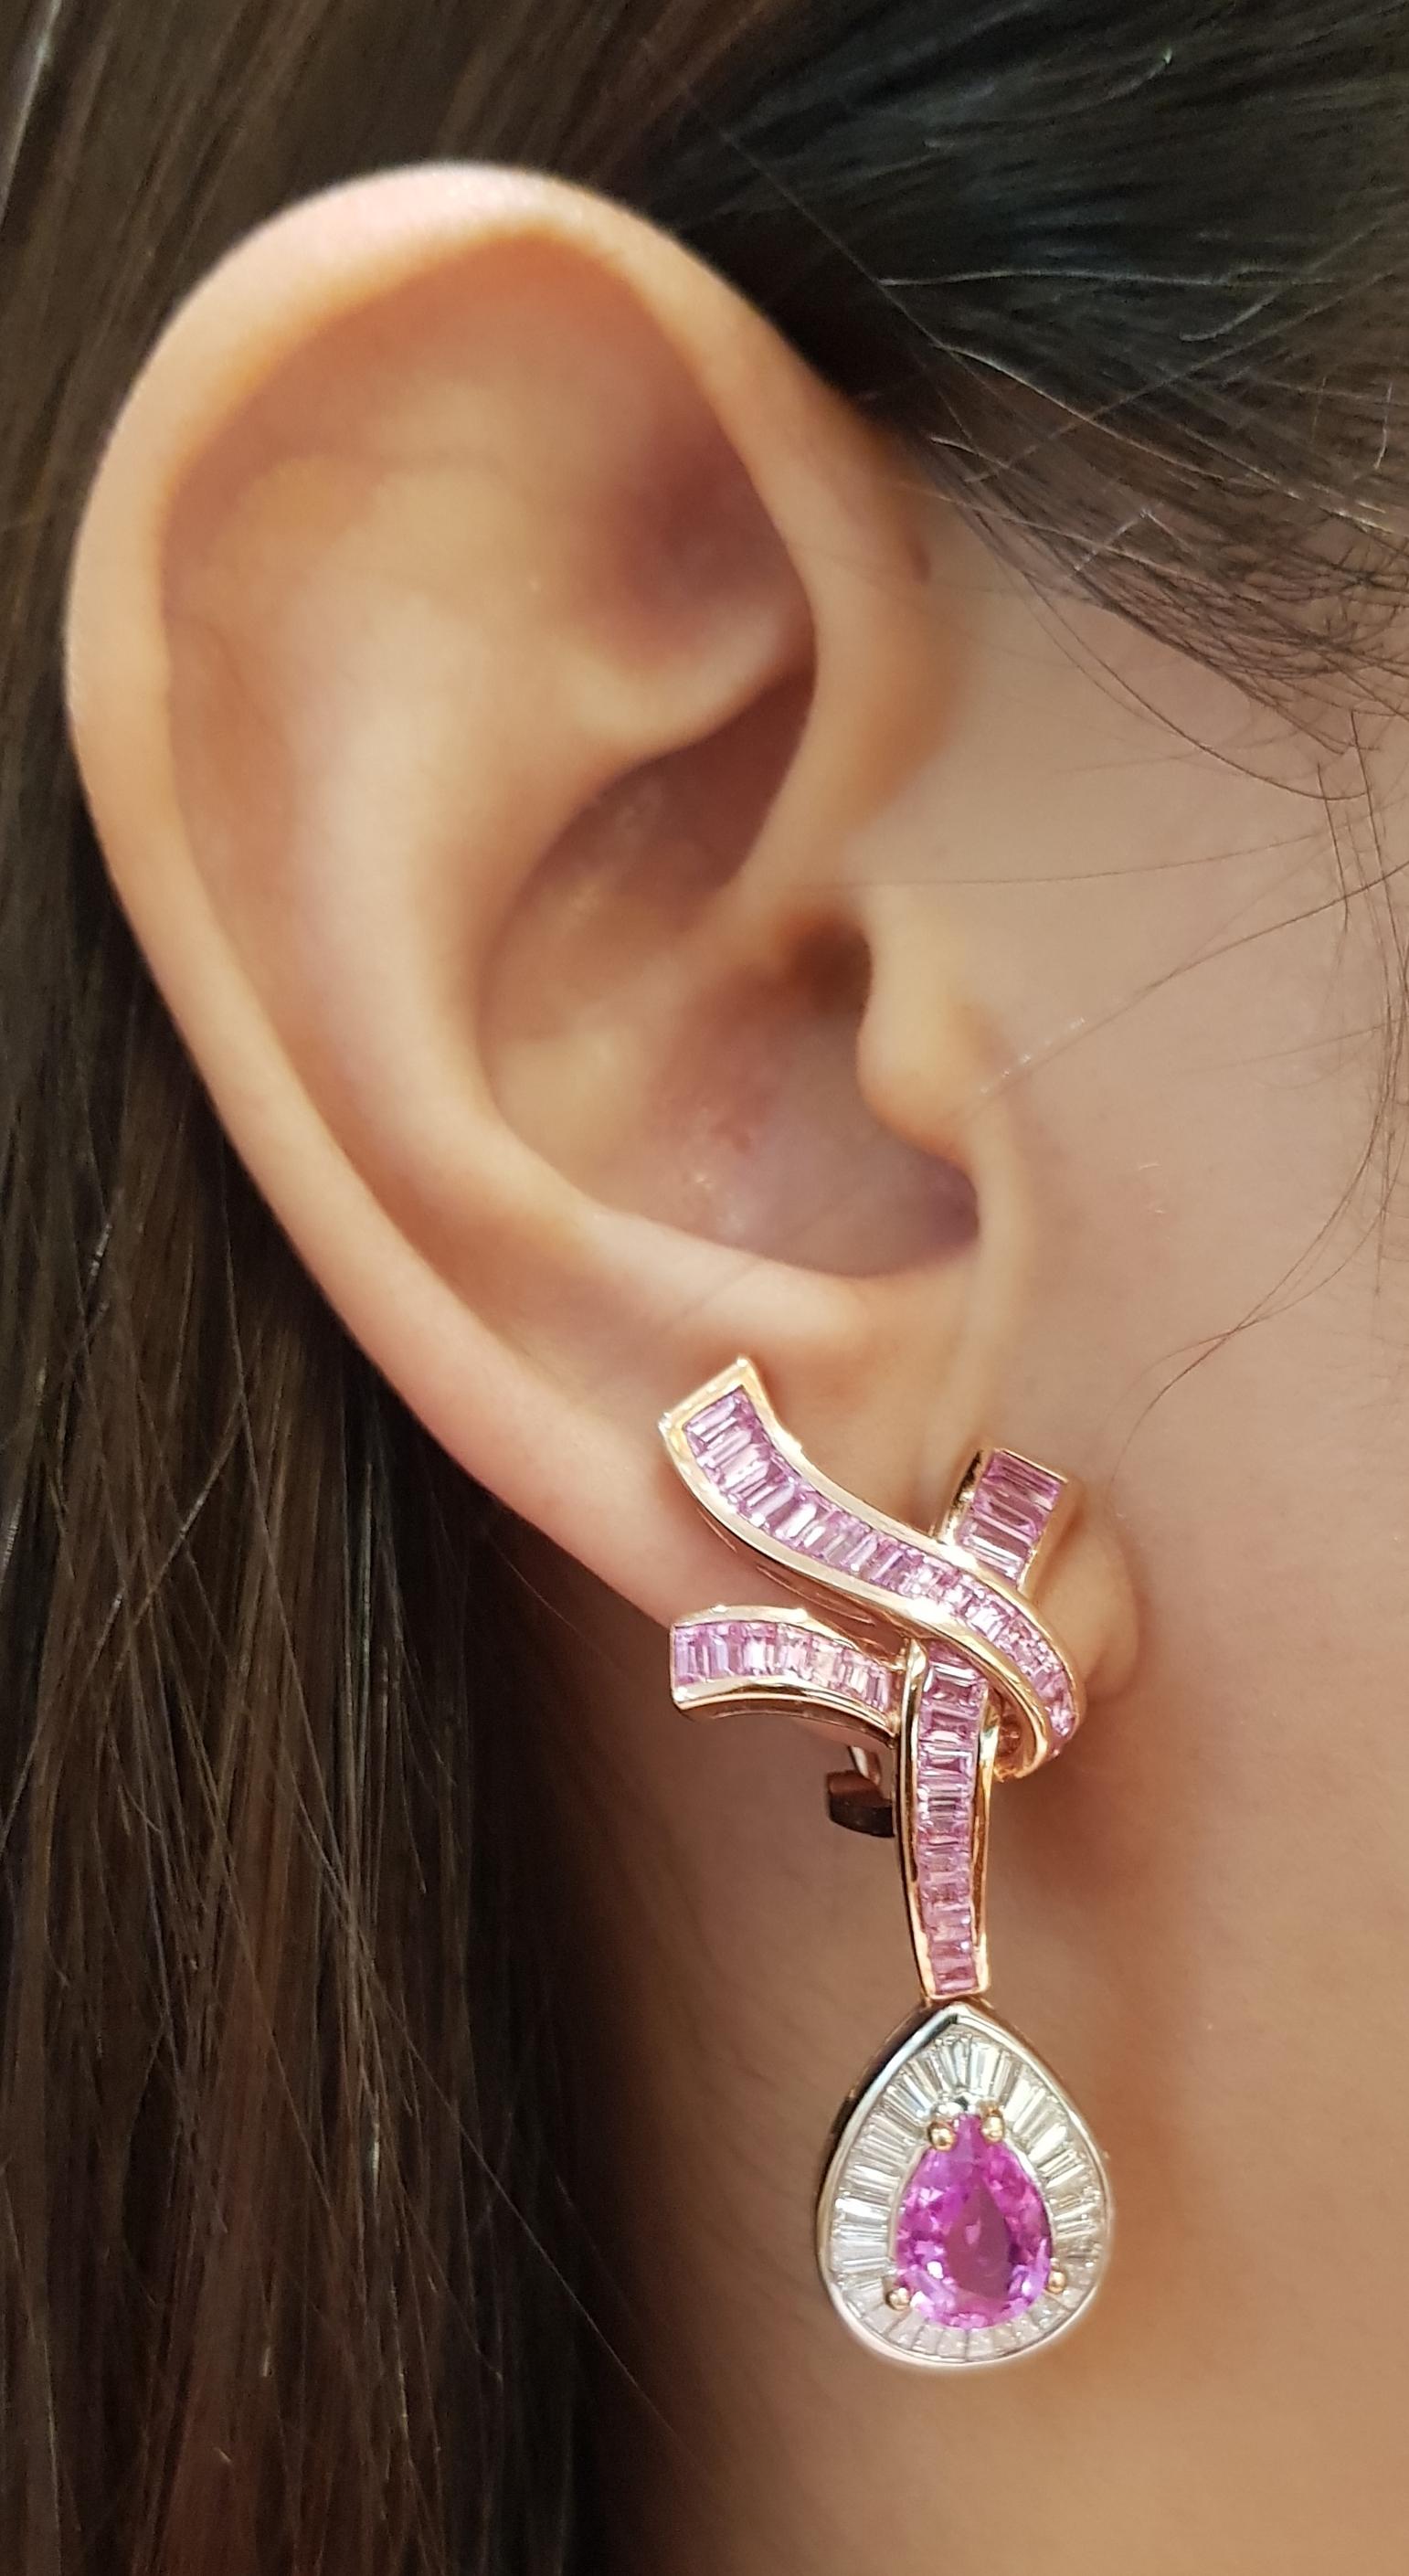 Pink Sapphire 4.0 carats with Diamond 1.12 carats and Pink Sapphire 6.47 carats Earrings set in 18 Karat Rose Gold Settings

Width:  1.9 cm 
Length:  4.2 cm
Total Weight: 14.0 grams

